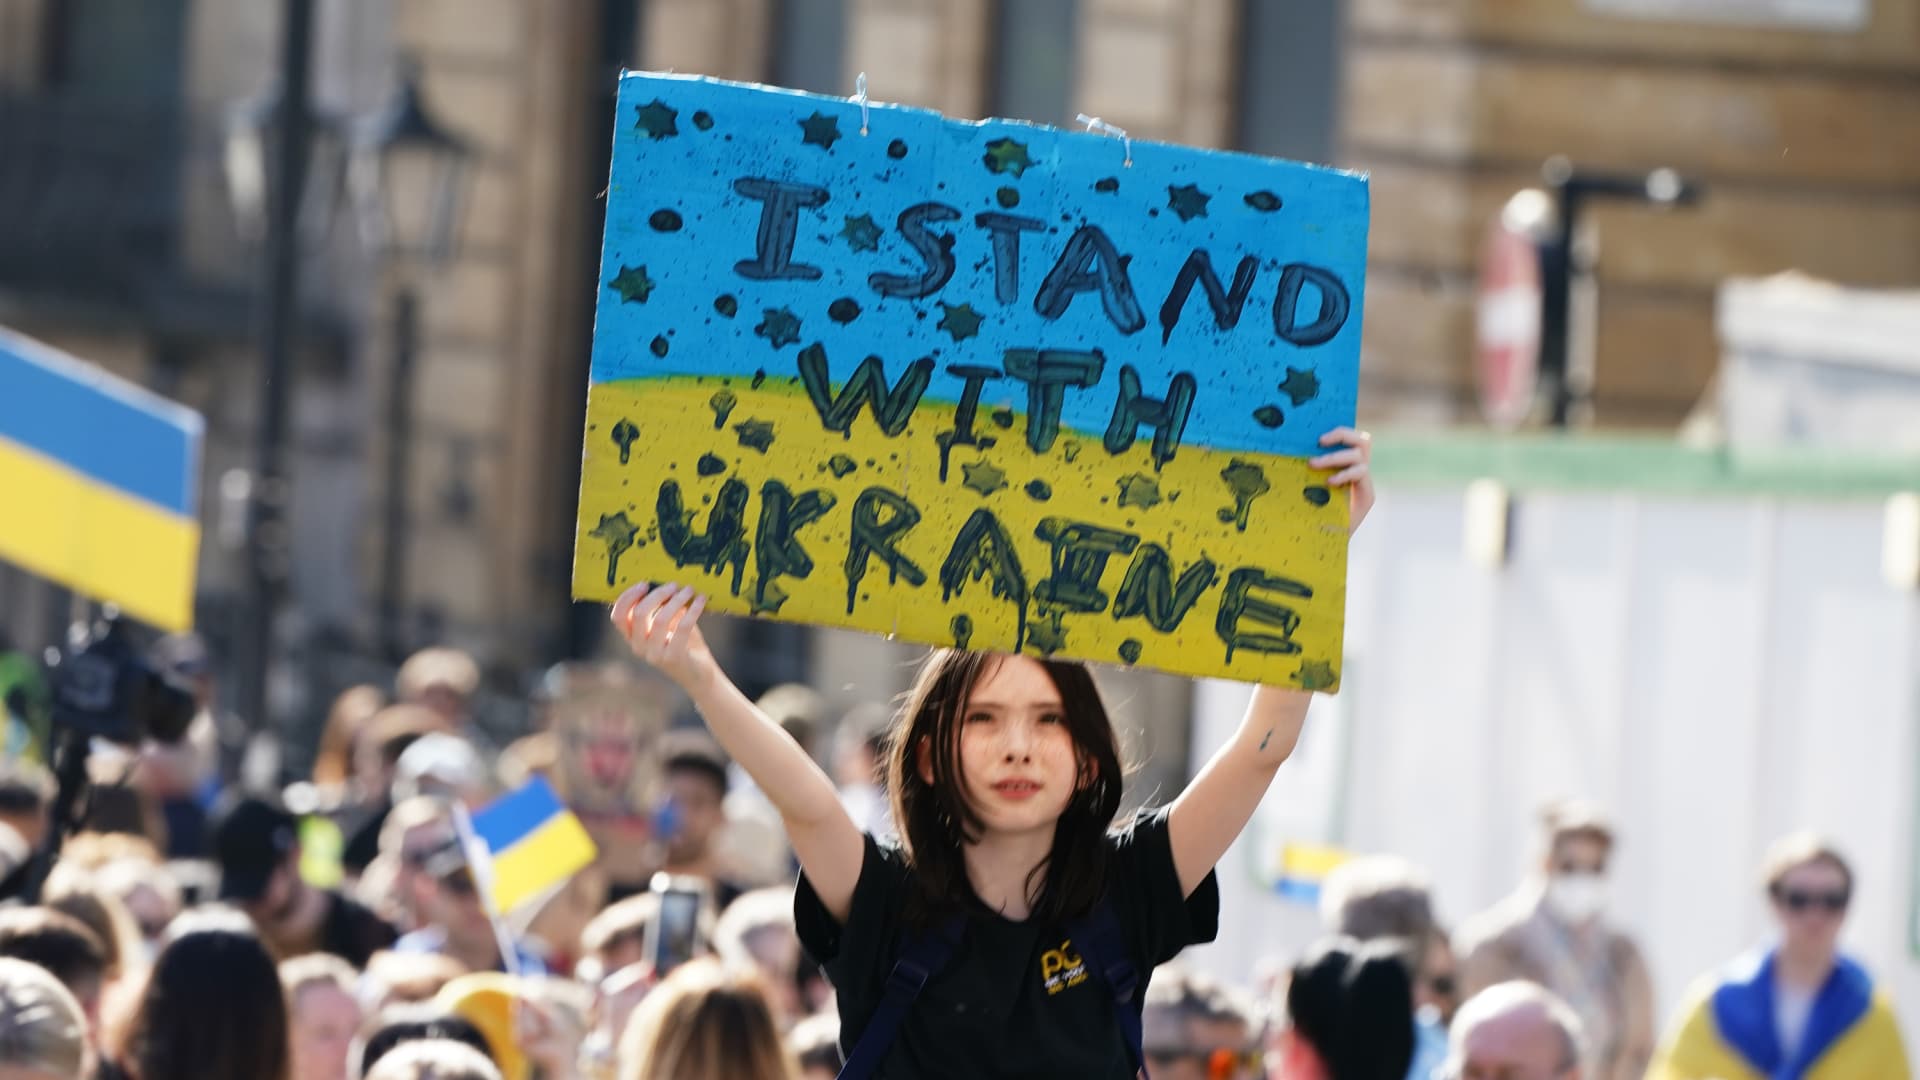 People take part during a solidarity march in London for Ukraine, following the Russian invasion. Picture date: Saturday March 26, 2022.